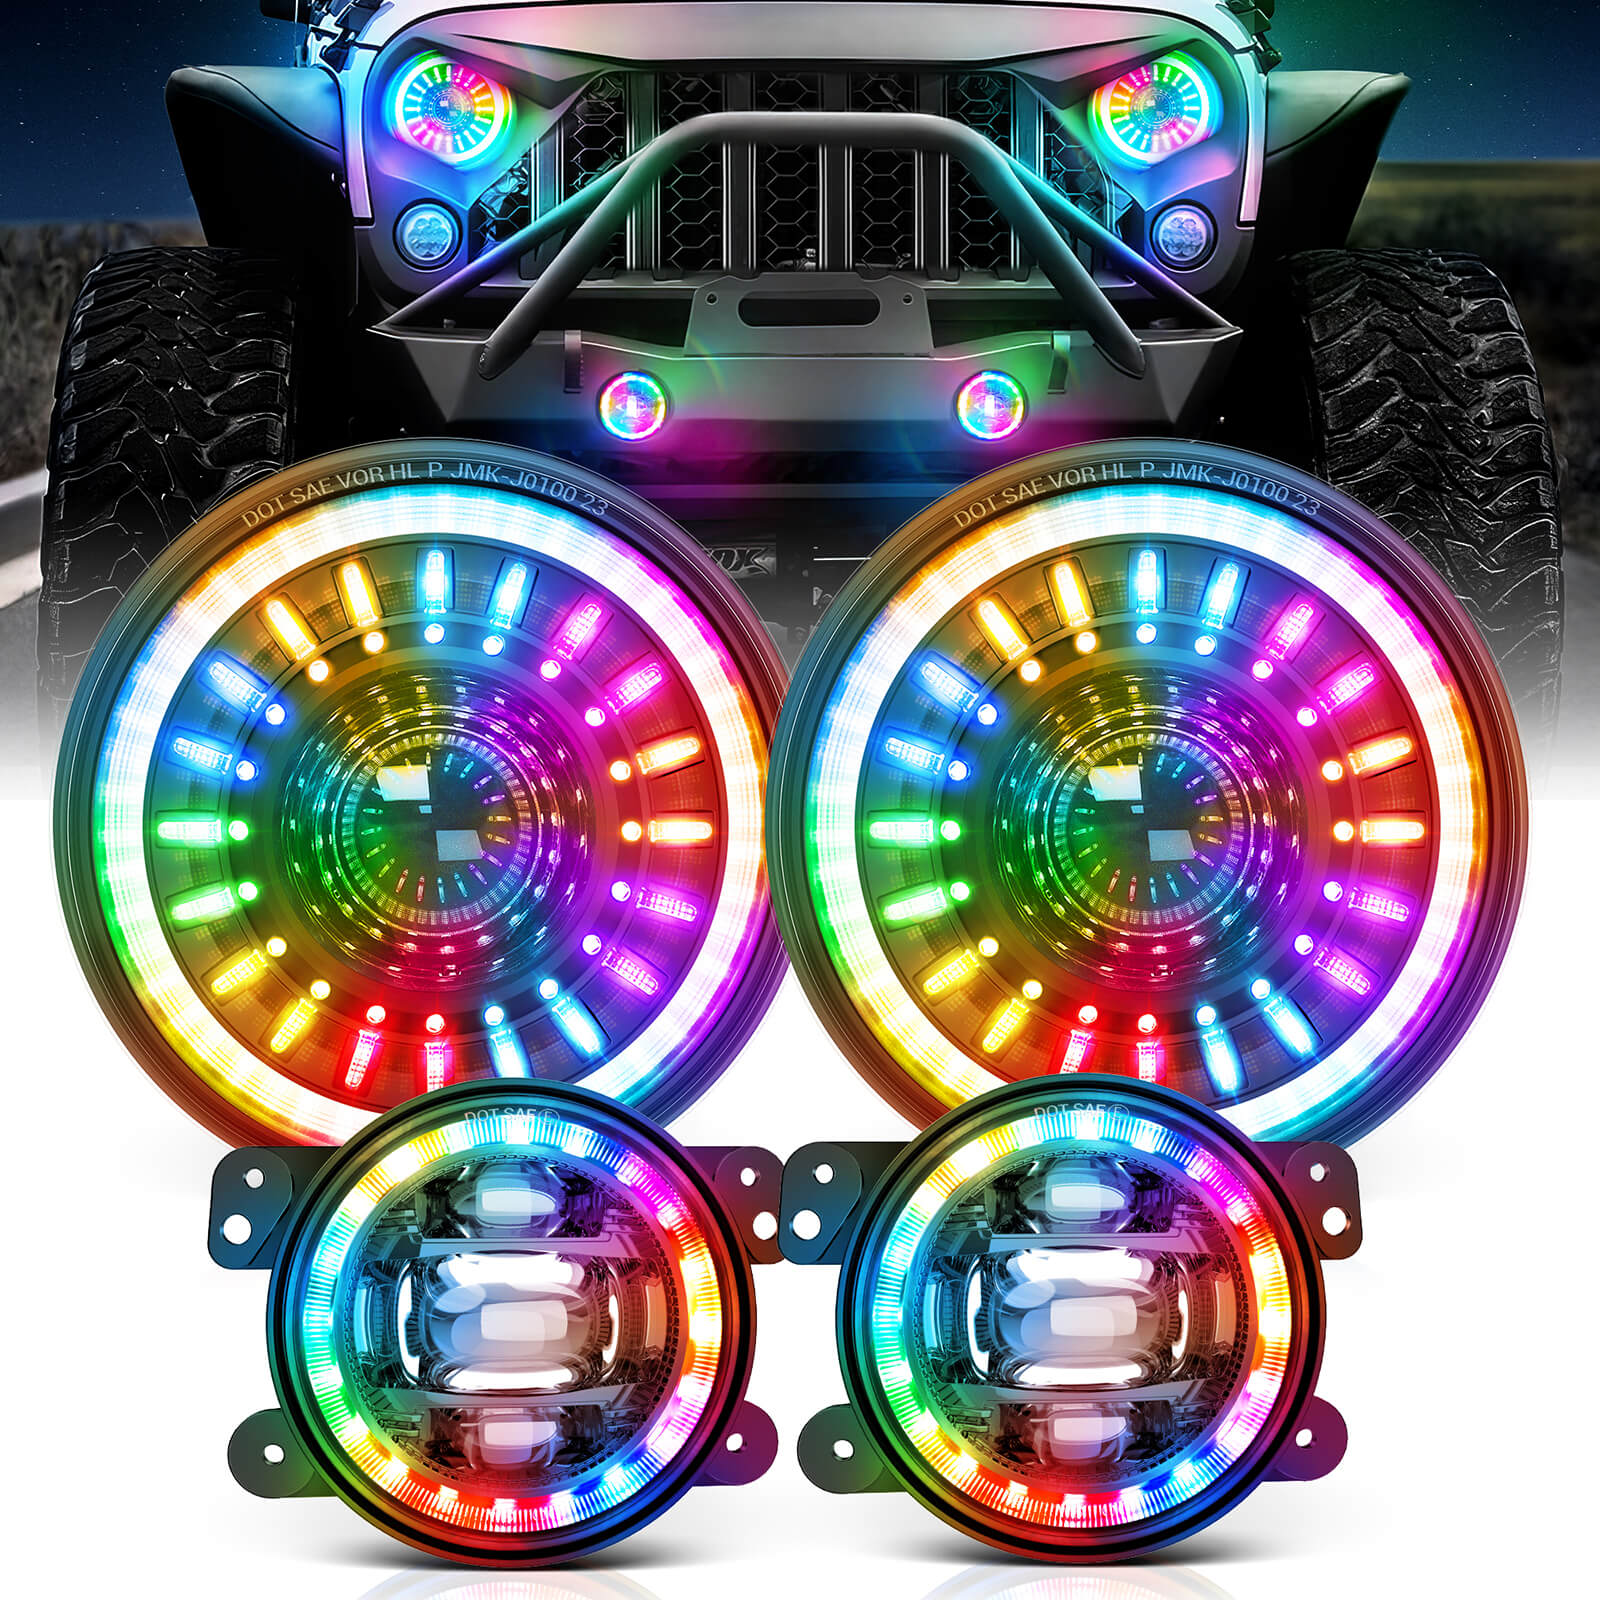 J1 RGB+IC 7″ LED Headlights with Fog Lights Assembly, Multi-color Chasing, DOT Approved For 1997-2018 Jeep Wrangler TJ JK Chevy Ford GMC